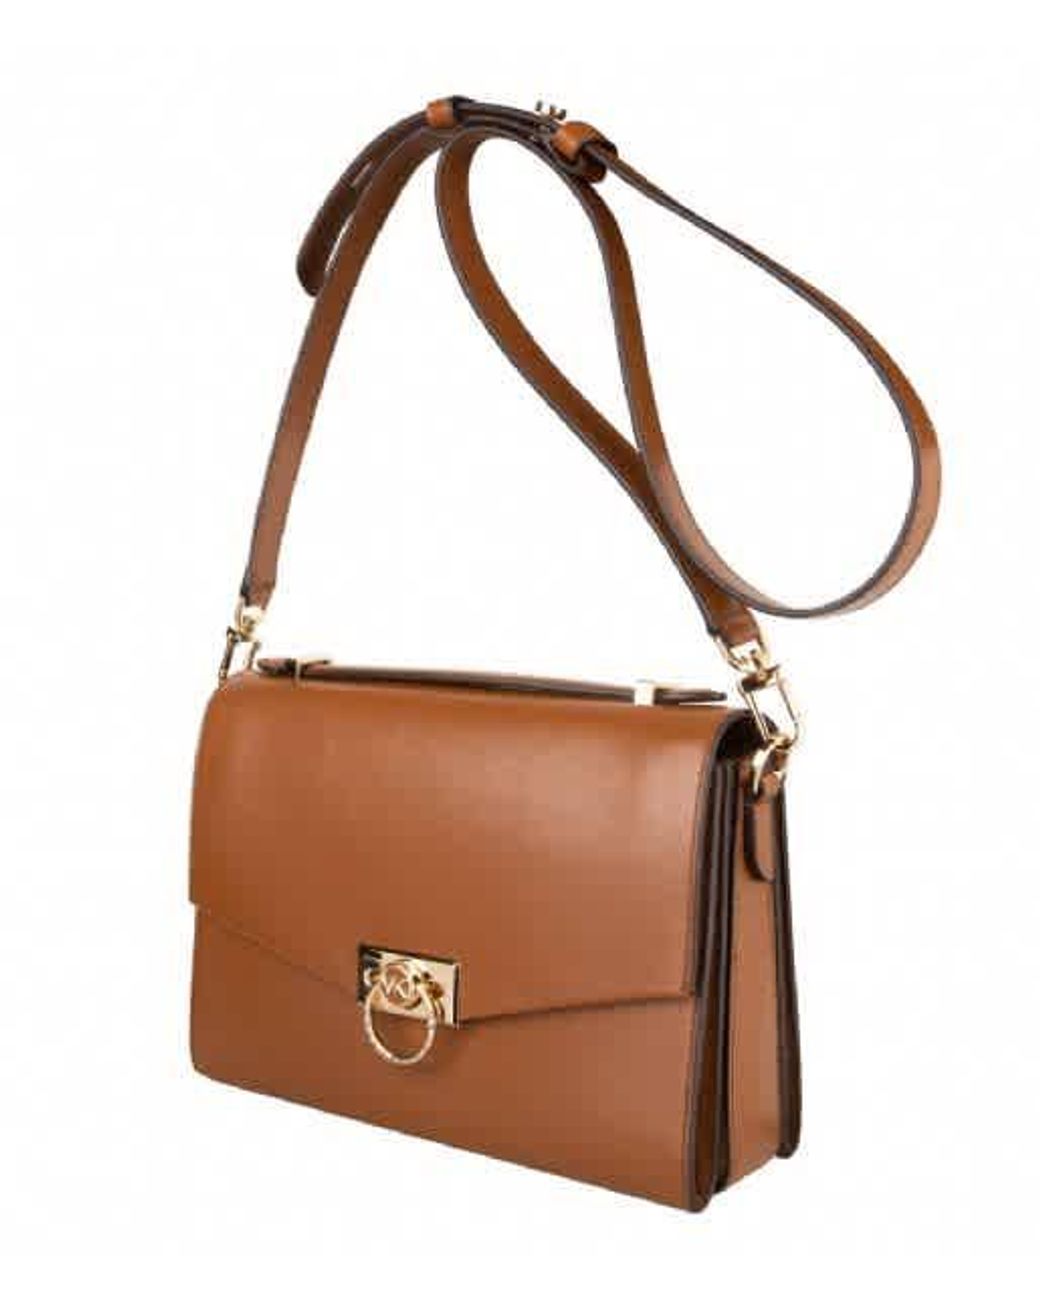 Michael Kors Hendrix Leather Messenger Bag in Brown | Lyst Canada